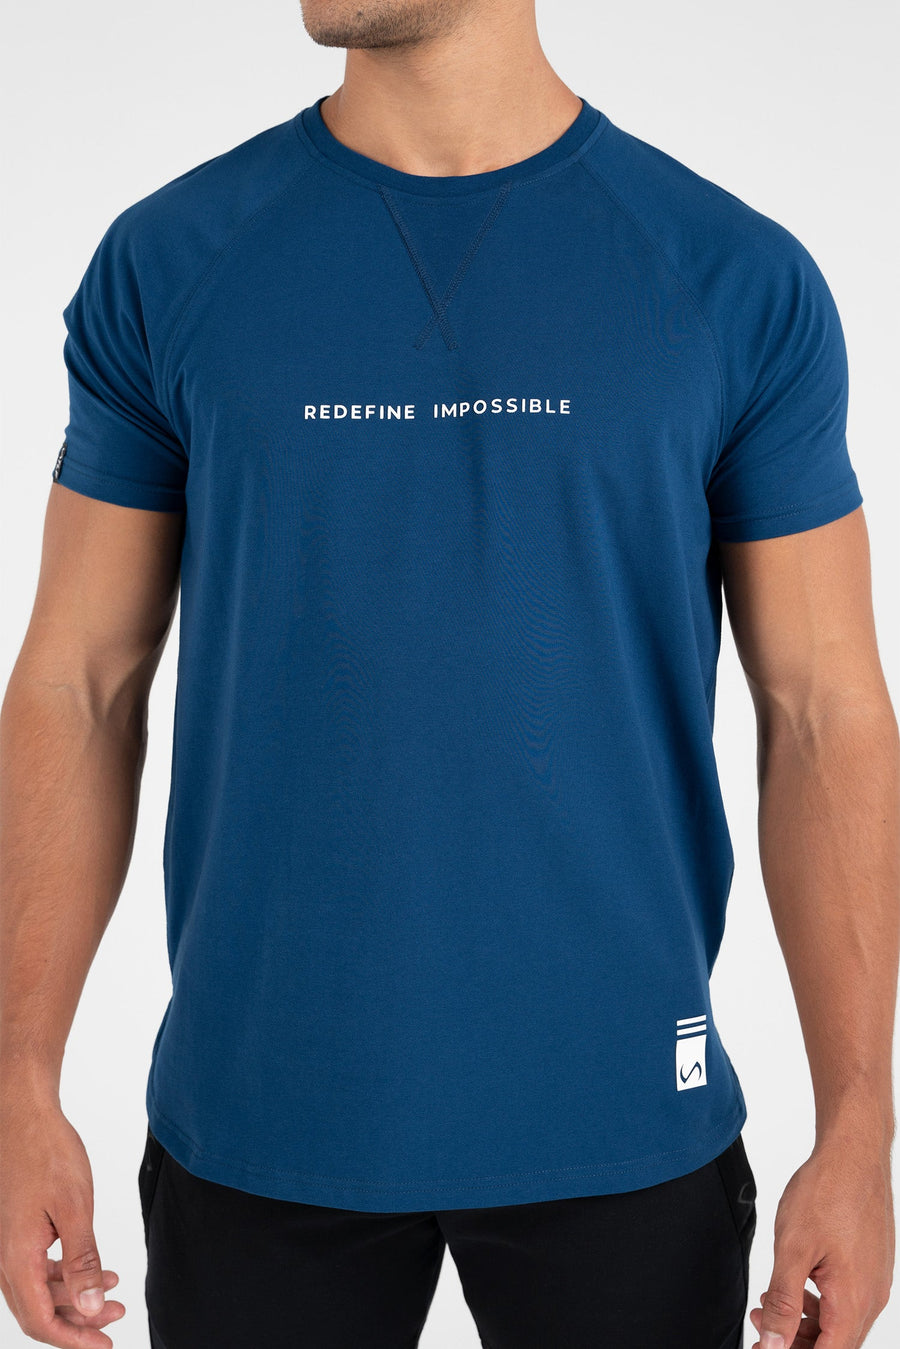 TLF Redefine impossible GTS Tee – Oxford - Blue 2